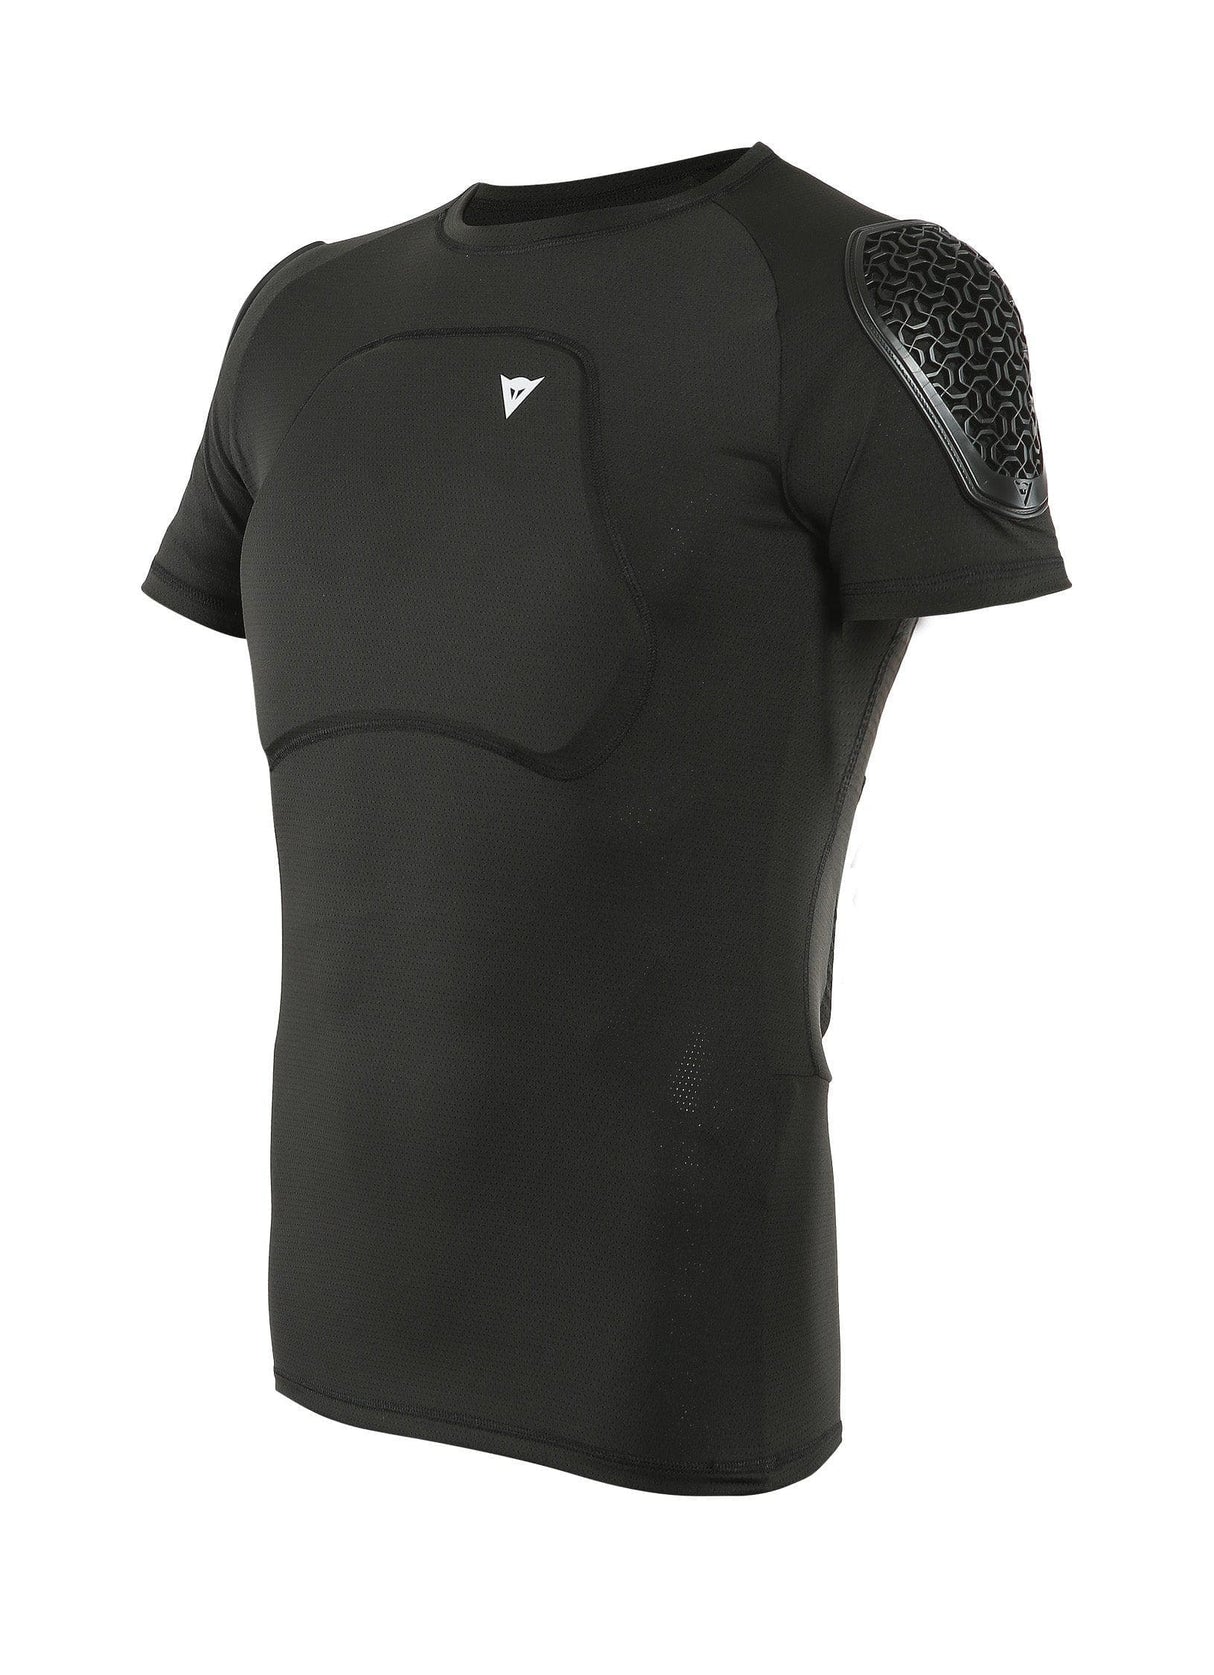 Dainese Trail Skins Pro Tee Armour (Black, S)